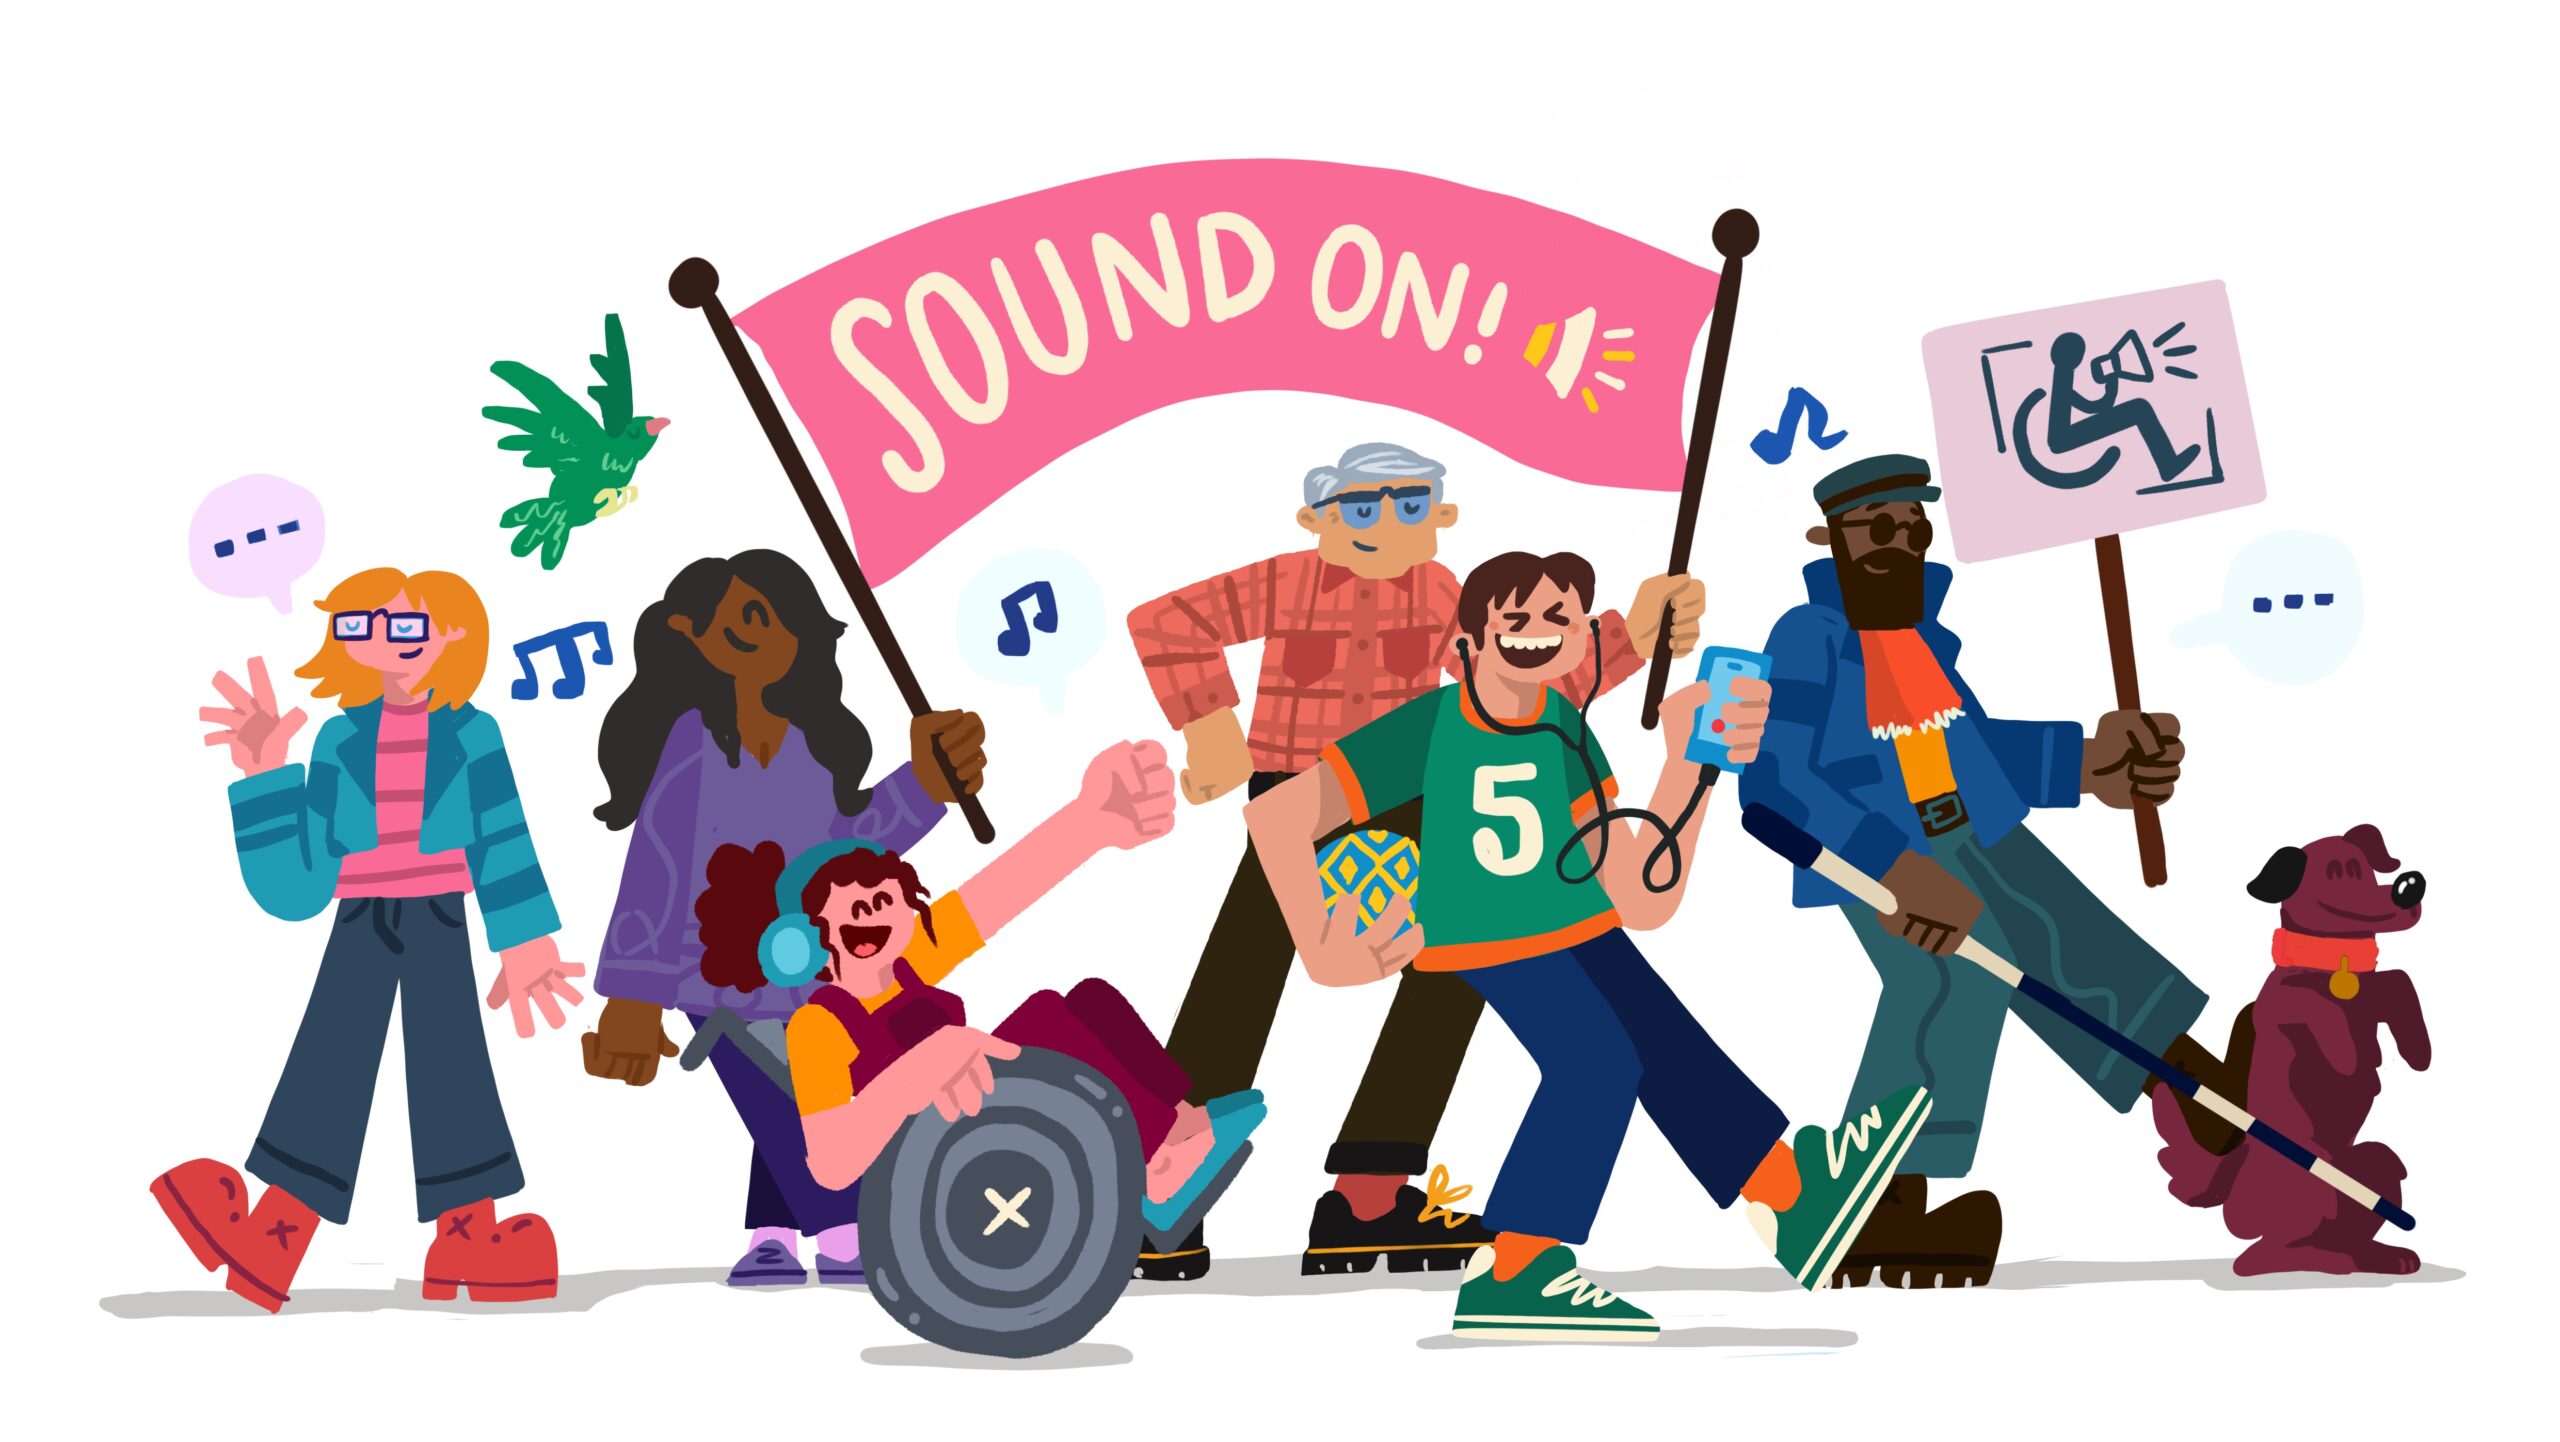 An illustration by Ashwin Chacko. This illustration represents the feeling and spirit of the Sound On! project. Illustration with six characters marching in a line with a pink banner with the words “Sound on!” written in white next to an audio speaker icon in white and yellow. The characters all range in age, ethnicity and gender, they are all smiling. The first person on the far left of the line is a woman in her twenties with red cheeks, blue eyes, glasses and shoulder length red hair. She is wearing a two-tone pink striped top under a two-tone blue striped jacket with a pair of navy jeans and bright red boots. She is waving and dancing. There is a pink speech bubble over her head to her right, and a blue music note to her left above her shoulder. There is a green bird with yellow feet and an orange beck flying above her head to her left. The next person in the line is a woman in her thirties with dark long brown flowing hair. She is wearing a purple jumper with swirl designs on the sleeves, navy trousers, light pink socks and purple shoes. She is holding the first pole of the pink “Sound On!” banner. There is a blue music note to her left above where she has her hand on the banner pole. The next person is a woman in their 20s with burgundy curly hair which is tied back in a ponytail. She is wearing a pair of light blue headphones. She is sitting in a silver and grey wheelchair. She is wearing a pair of brown dungarees, orange t-shirt and a pair of blue slip on shoes with no socks. Their right arm is resting on the wheel of her chair, she is holding her left arm up high in the air, with her fist clinched. There is a blue music note to the left over her clinched fist. The next person in the line is a grey haired man in his 70’s. He is wearing glasses with tinted blue lenses, a three-tone red checked pattern shirt, black trousers, bright red socks, and black shoes with an orange stripe down the side of the sole and orange shoe laces. The shoes have thick soles. He is holding onto the Sound On! banner with his left hand and his right hand on his hip. The Sound On! banner is above his head and there is a blue music note to his right at his elbow. The next person is in their twenties. They have brown hair split in the middle. They are wearing a two-tone green t-shirt with an a orange collar, sleeve cuffs and trimming at the bottom of the t-shirt. They are also wearing blue jeans, bright red socks, green trainers with cream laces and soles. They are wearing black headphones connected to a blue coloured smart phone that they are carrying in their left hand. They are holding the smart phone out from their body almost in front of their face, and in their other hand they are carrying a football with a yellow and blue zig zag and diamond pattern. They are singing along to the music they are listening to. The next person is a man in his 50s with a long black beard. He is wearing a grey hat, black sun glasses, a bright red scarf with a white trim, an orange top, a two toned blue jacket with elbow patches, a black buckled belt, teal green trousers, and black boots with a thick sole. In his left hand he is carrying a placard, which has a brown pole and a pink banner. The banner has an icon of a person sitting in a wheelchair with a megaphone with sound waves coming from it. There is a blue music note over his head, and a light blue speech bubble above his hand where he is holding onto the placard. In his left hand he is cane pointing forward. The walking cane is white with black striped. At the front of the line is a brown dog standing up on his hind legs. The dog has a big fluffy tail, and is wearing a red collar with an orange tag on the front. The dog is smiling.